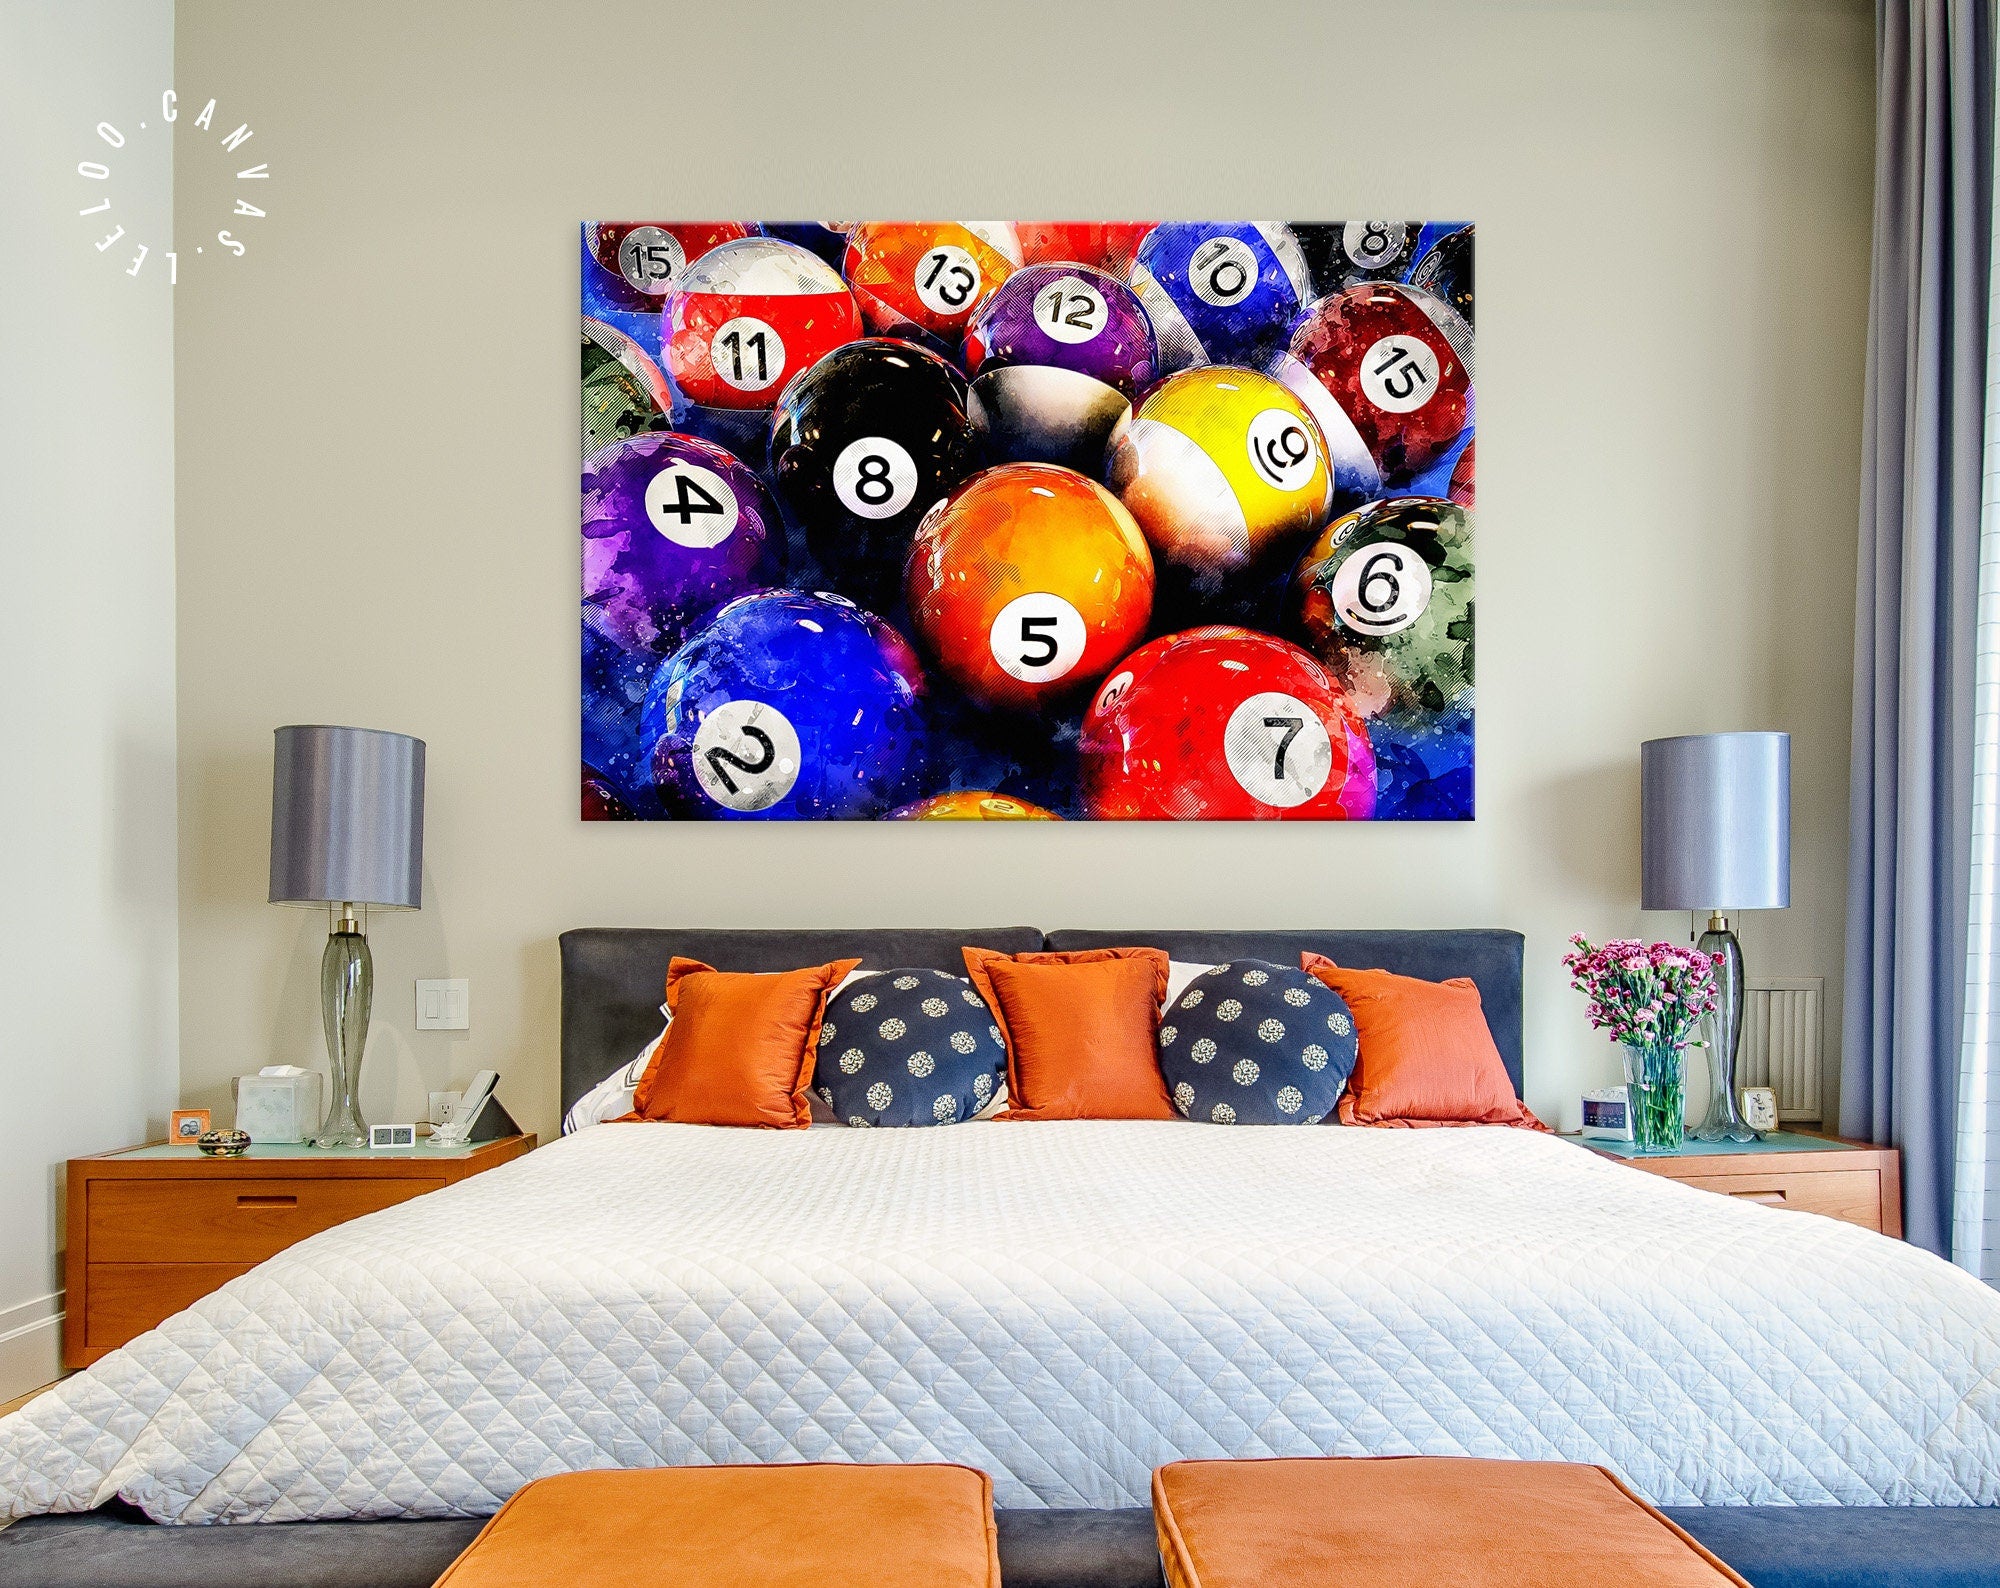 Poolrooms Art Board Prints for Sale